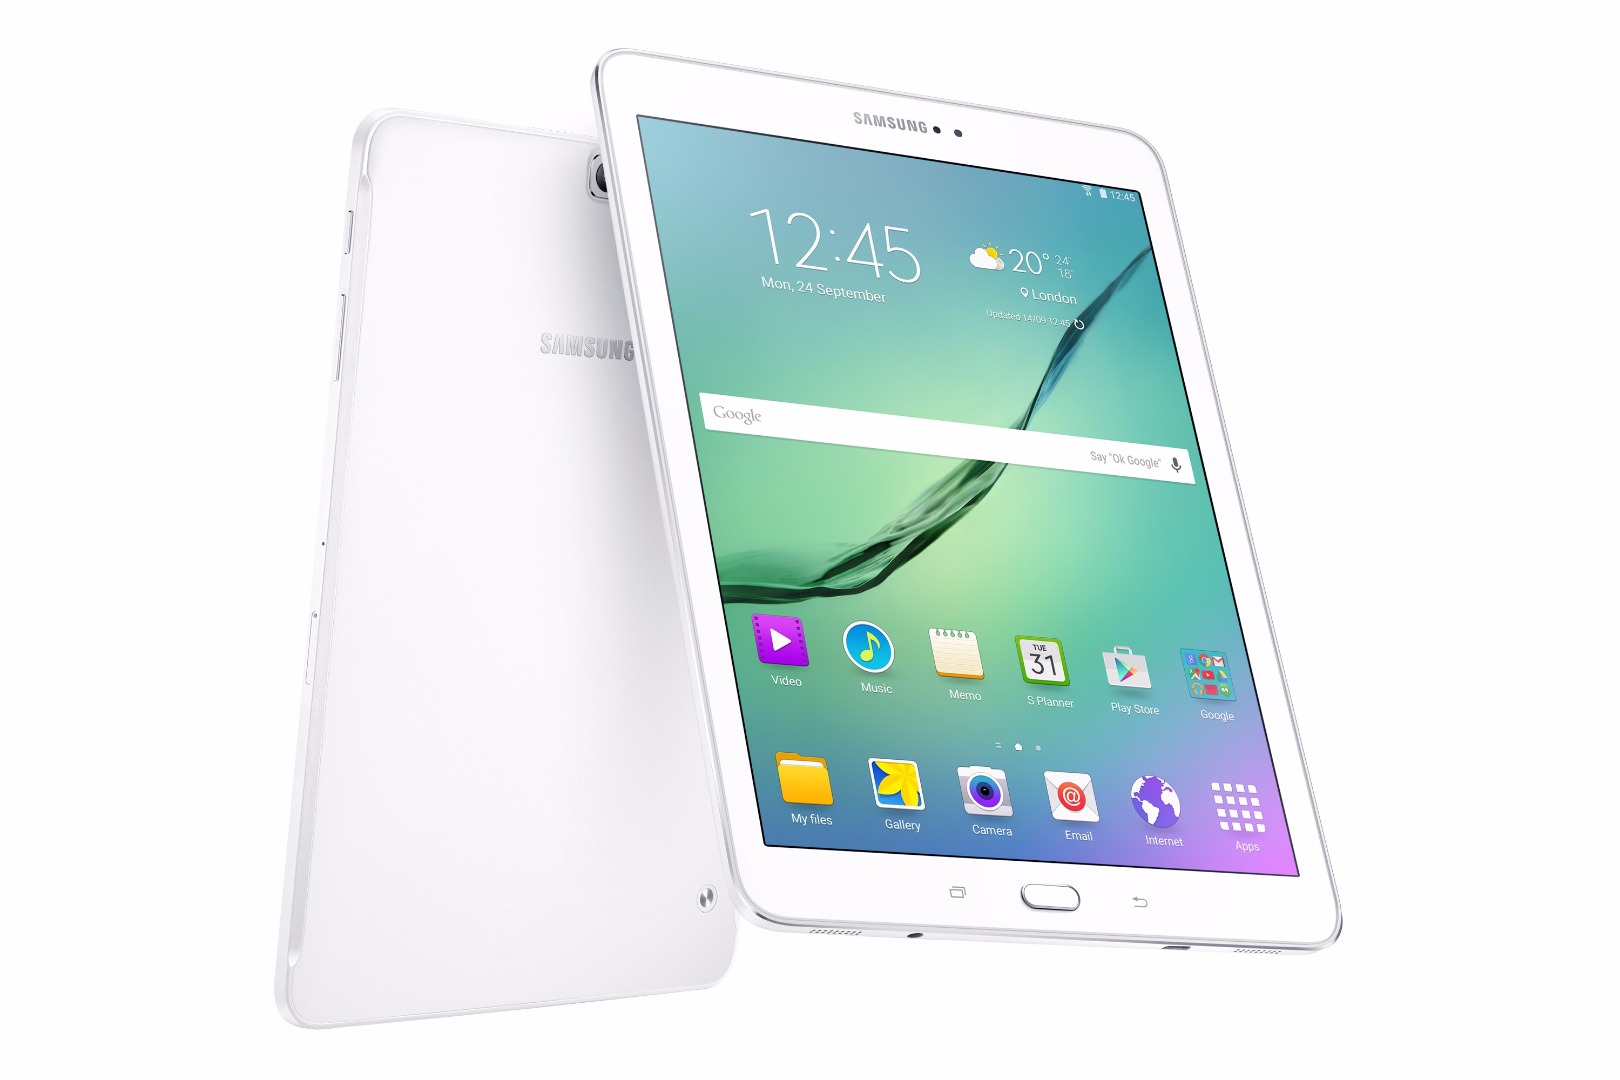 Negende Roos Paine Gillic 9.7” Galaxy Tab S2 vs. iPad Air 2: Design, specs, price, and more -  SiliconANGLE